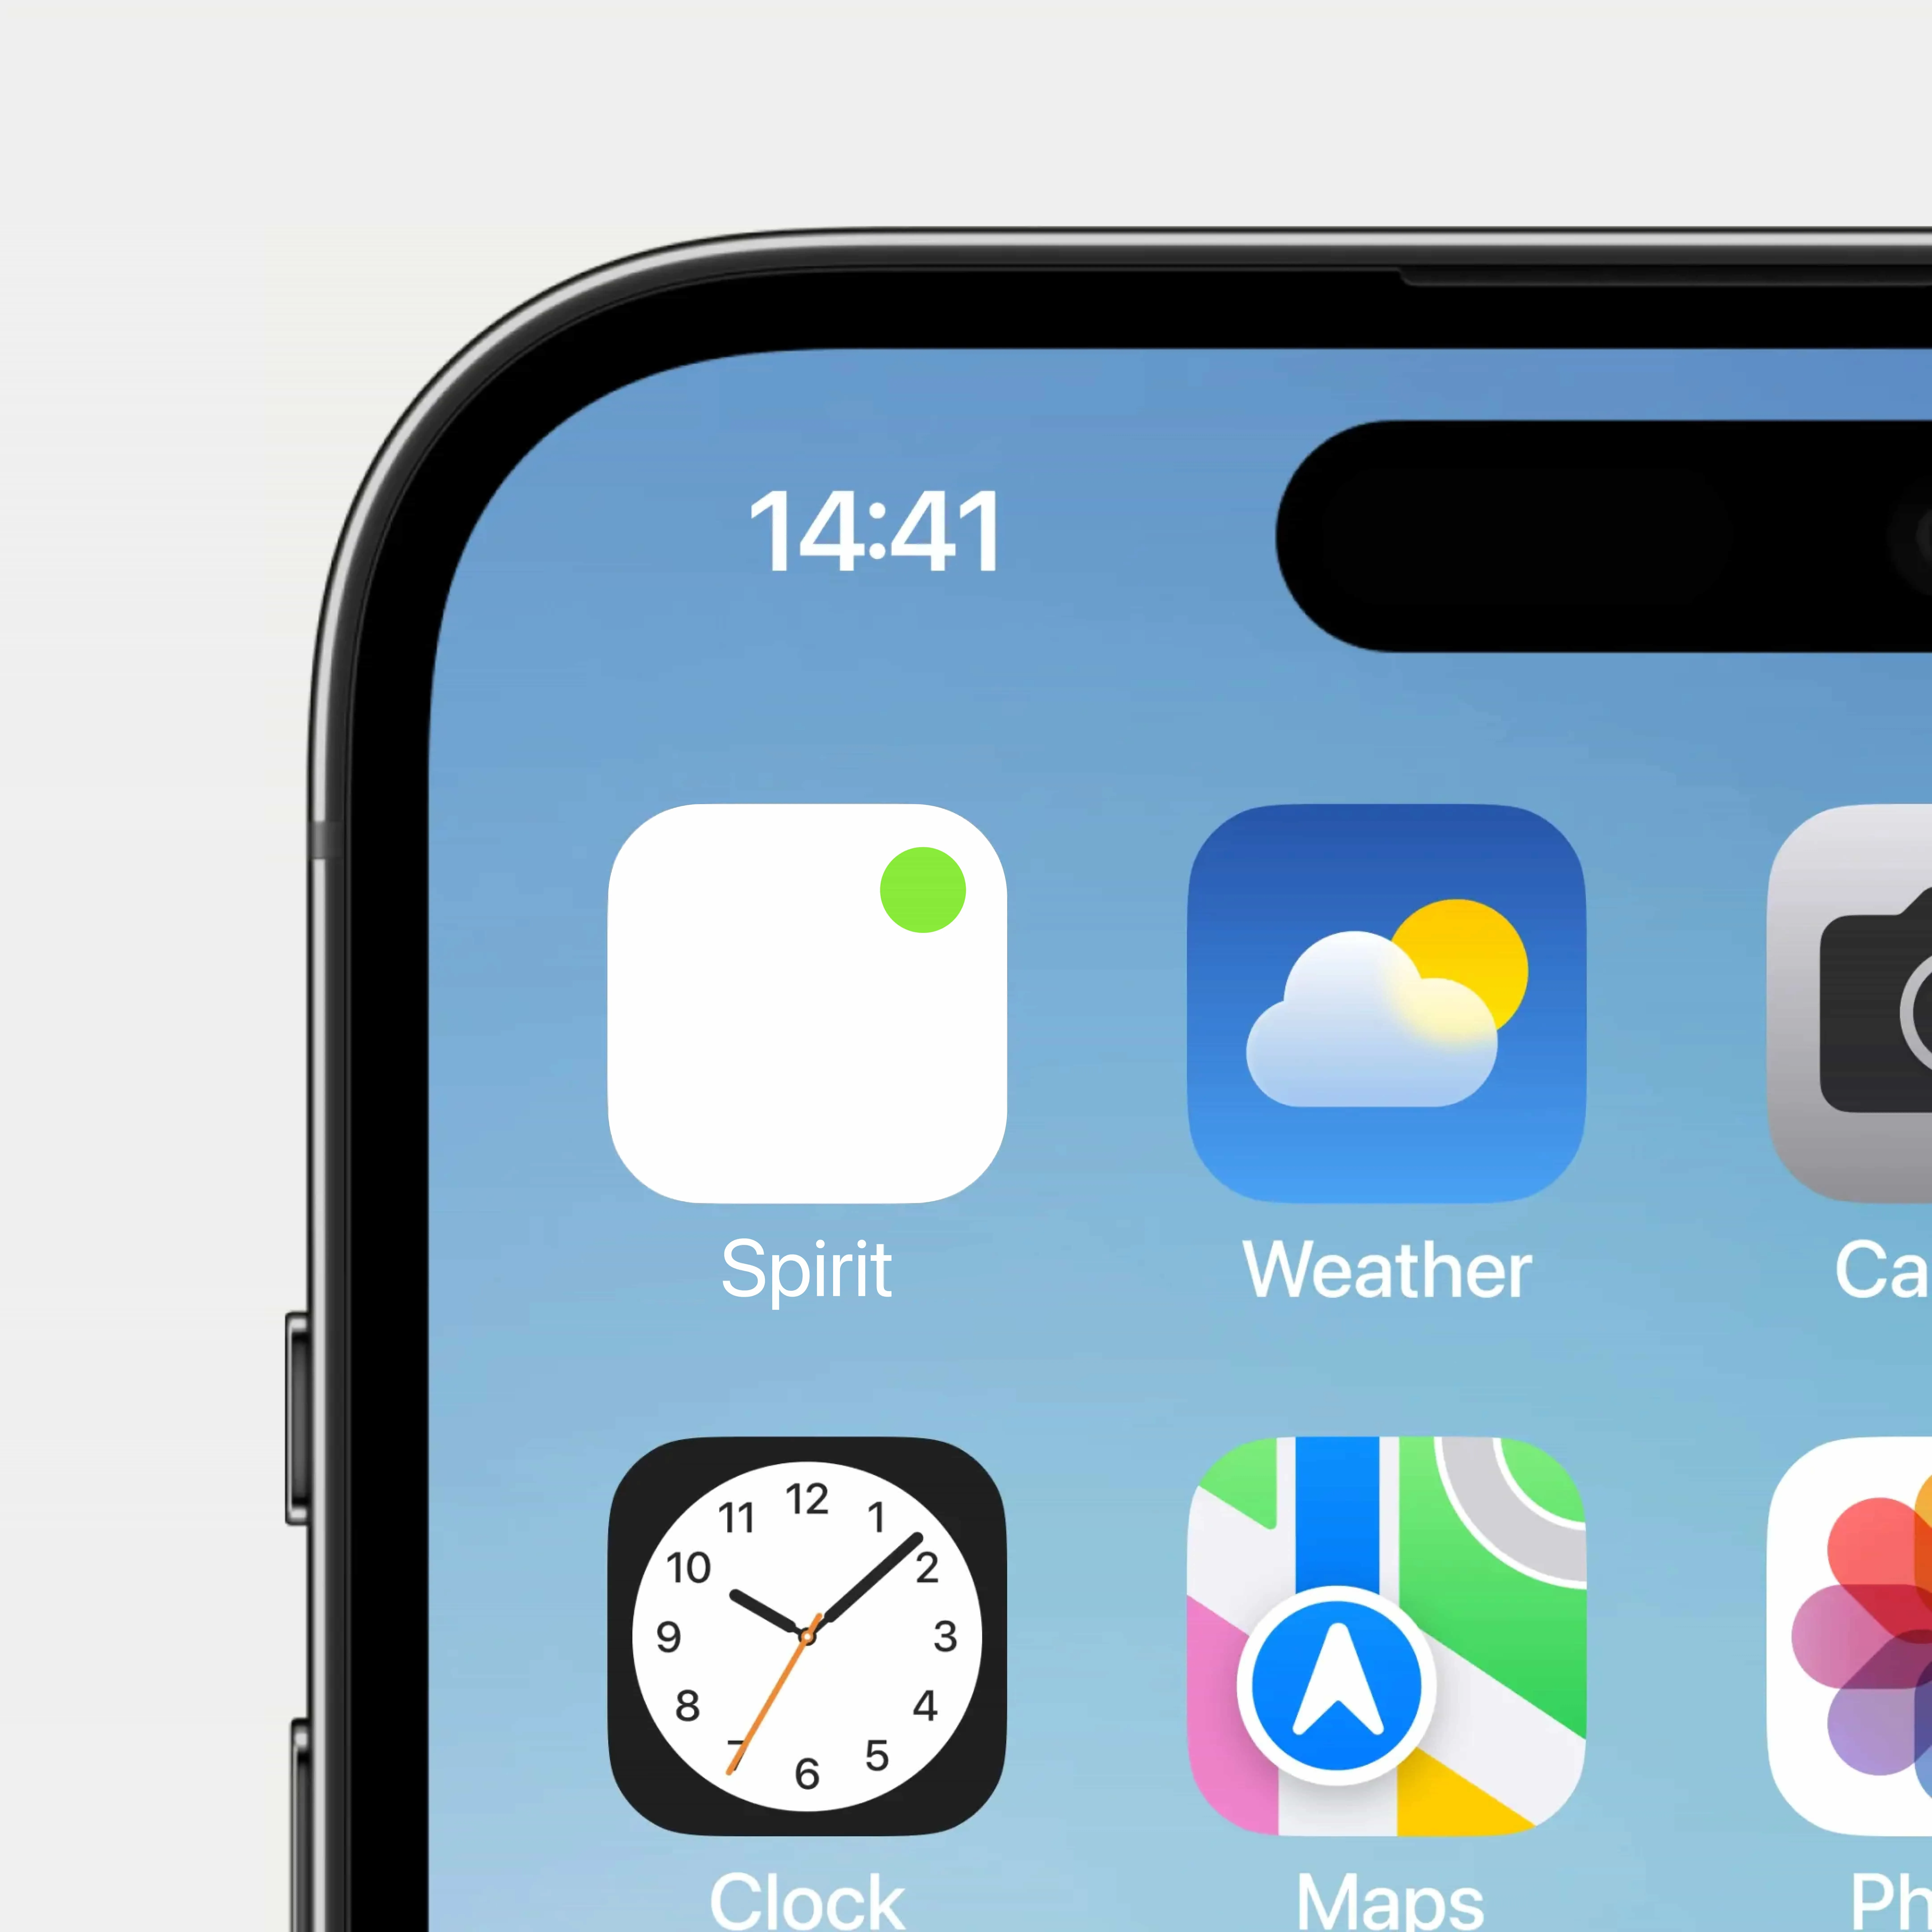 cropped mockup of an iphone display including an app icon that's white with a green dot in the top right corner